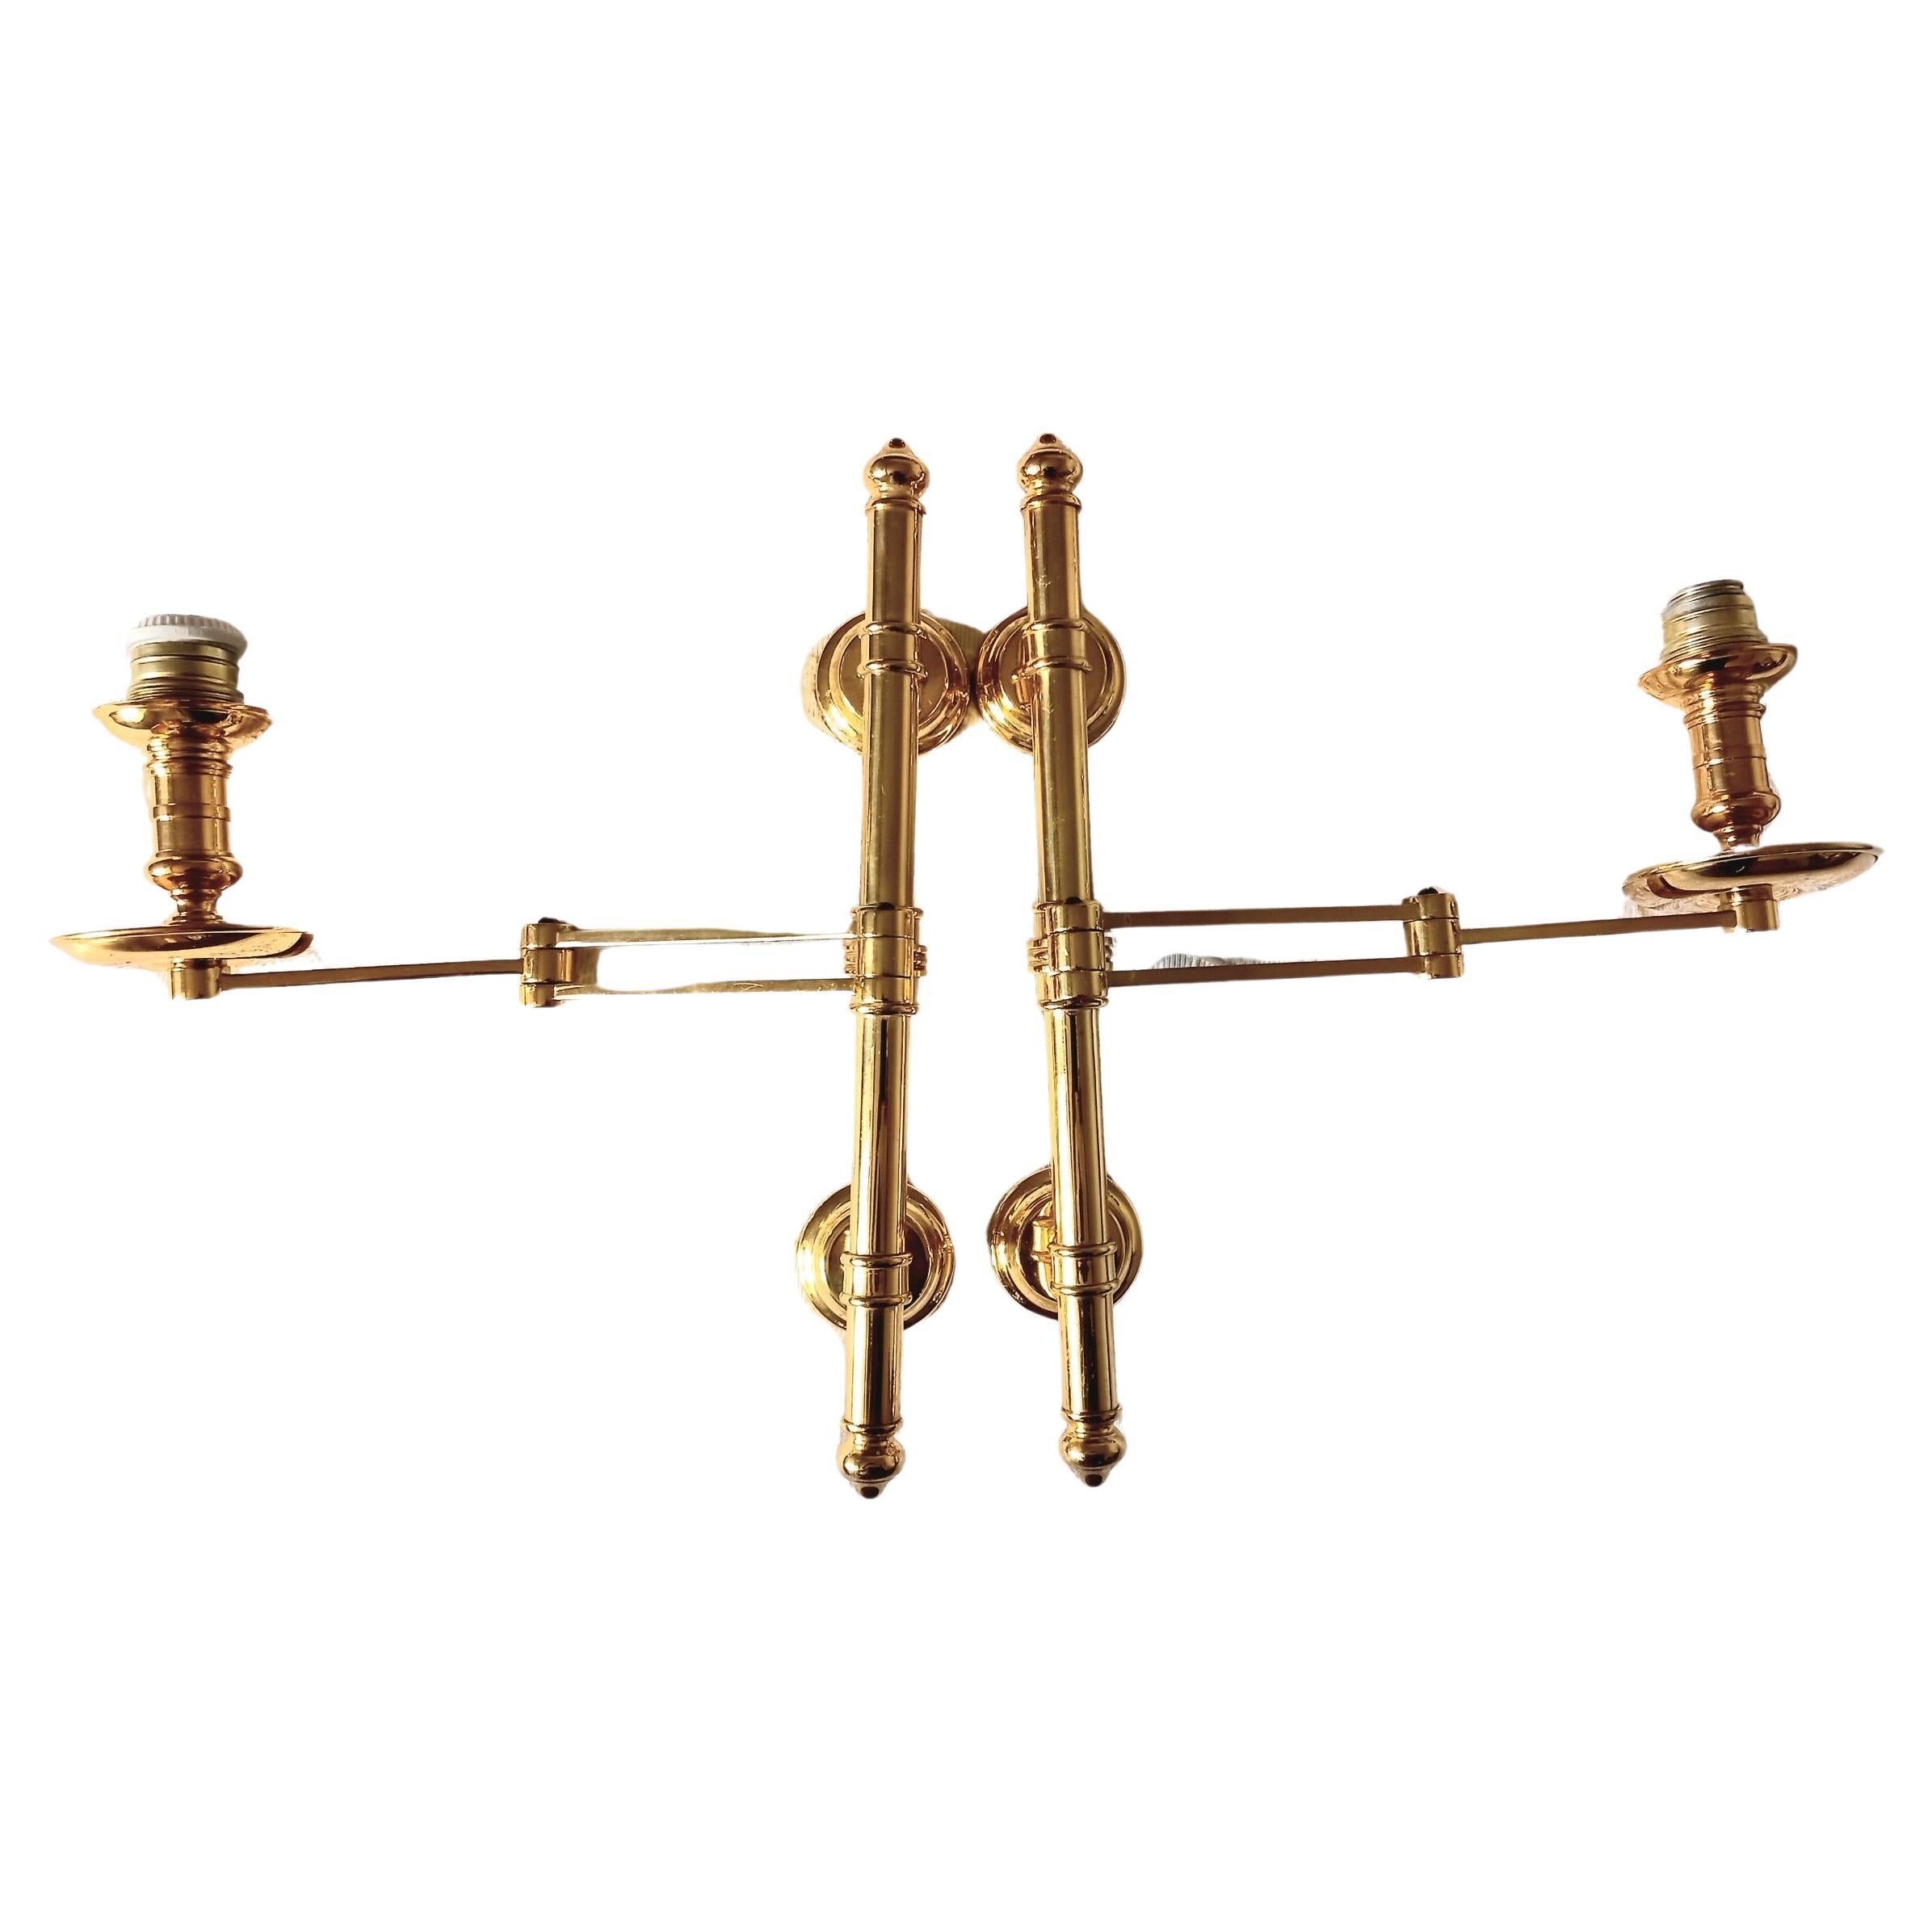  Pair of French Maison Jansen Swing Arm Sconces For Sale